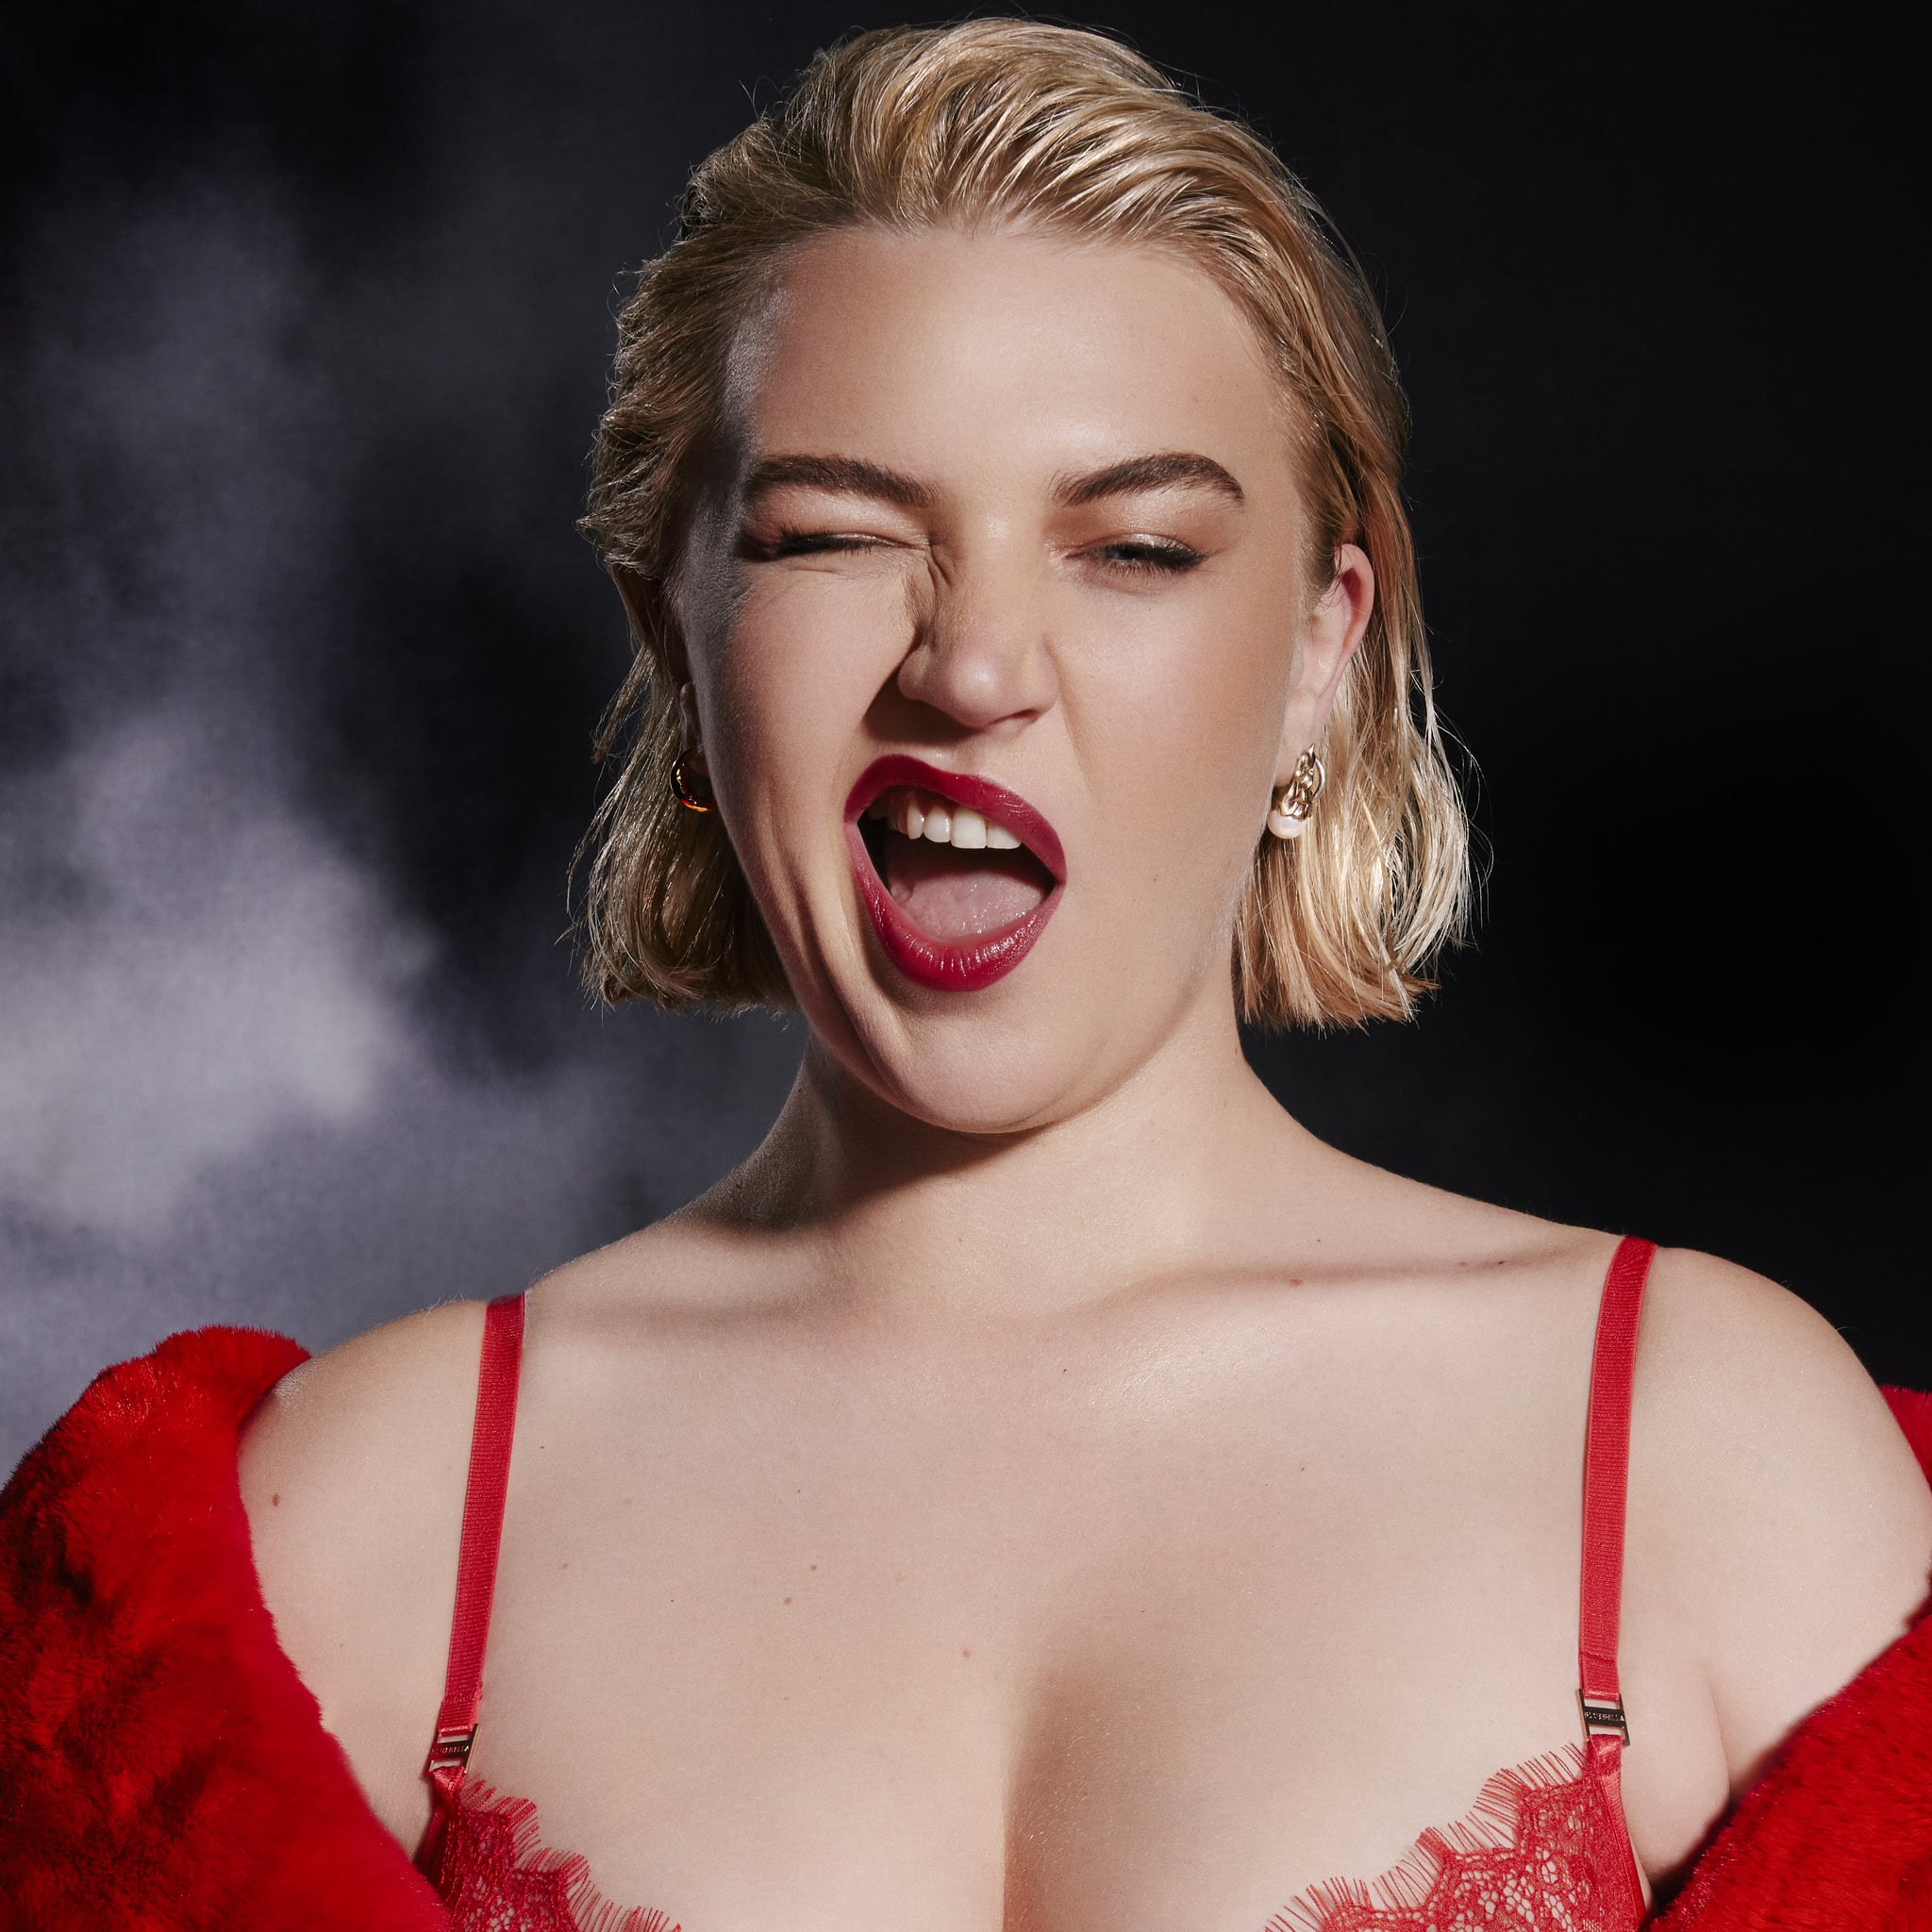 Ask a Bra-fessional: Lucy's Boudoir supports women of all shapes